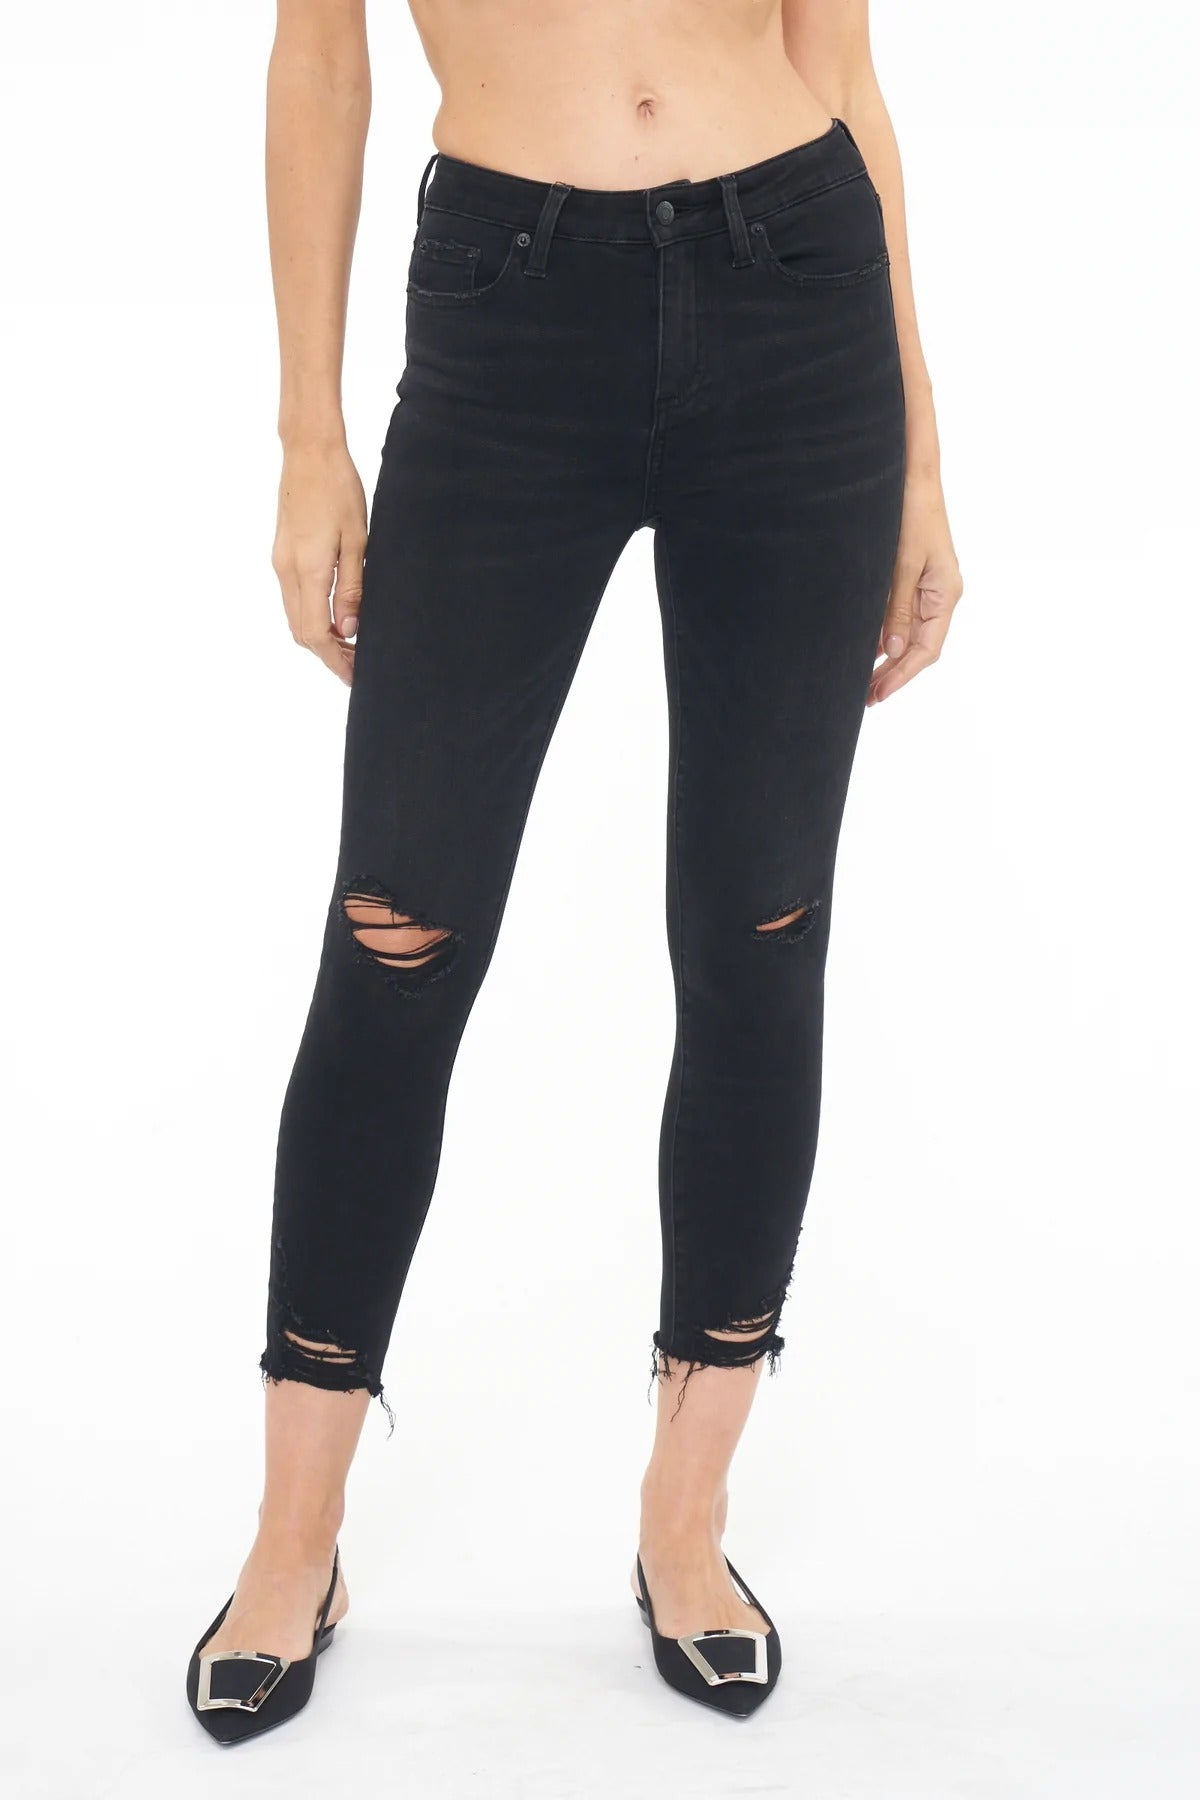 Carbon Audrey Mid-Rise Cropped Skinny Jean – Pappagallo Lancaster